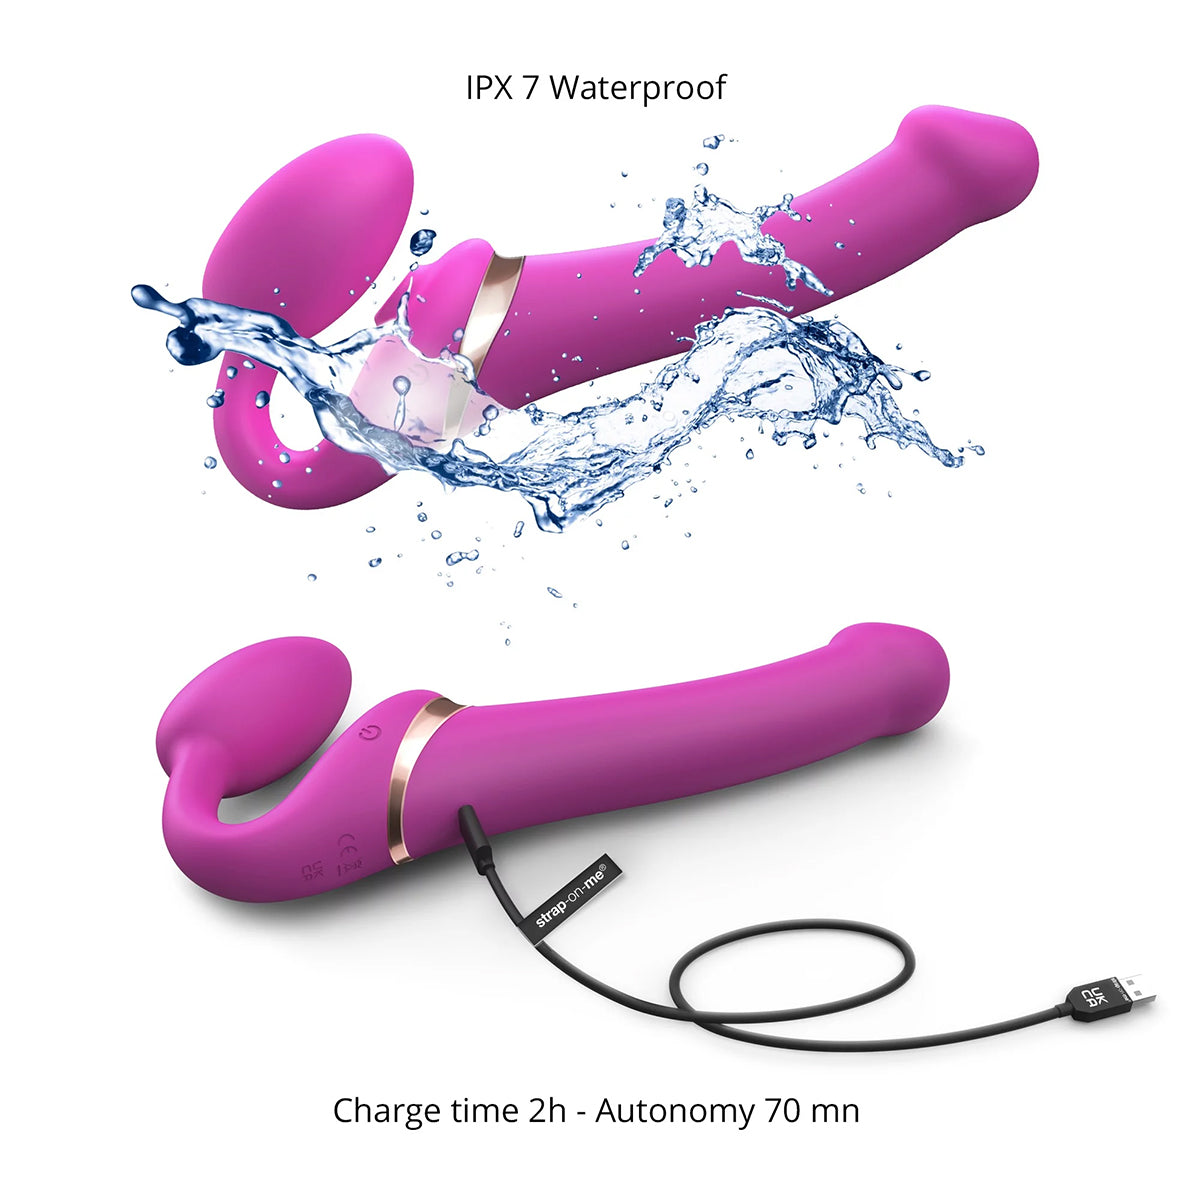 Strap-On-Me Rechargeable Remote-Controlled Multi Orgasm Bendable Strap-On Fuchsia M - Zateo Joy